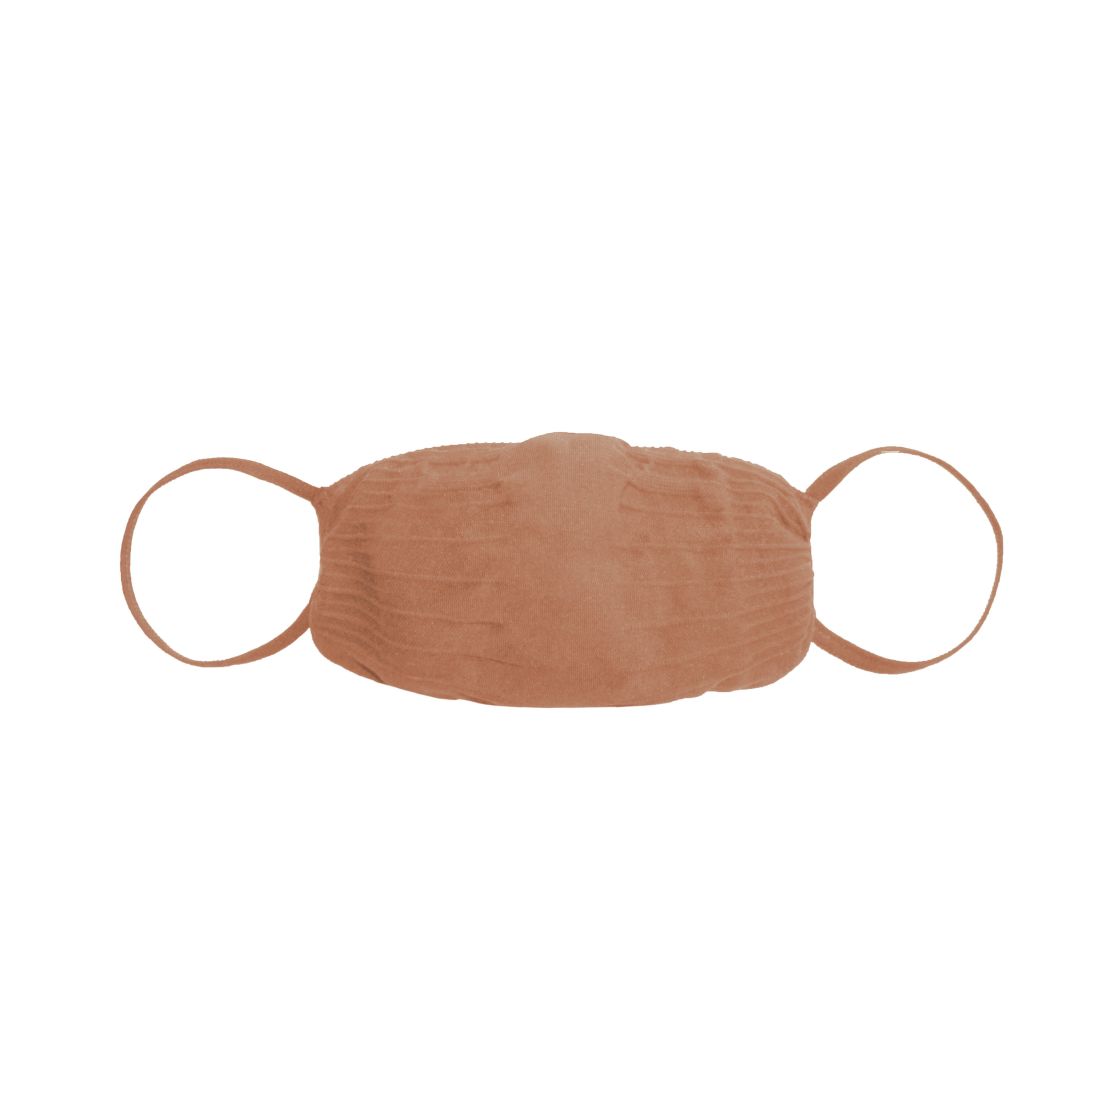 The seamless face masks come in five earth colors.